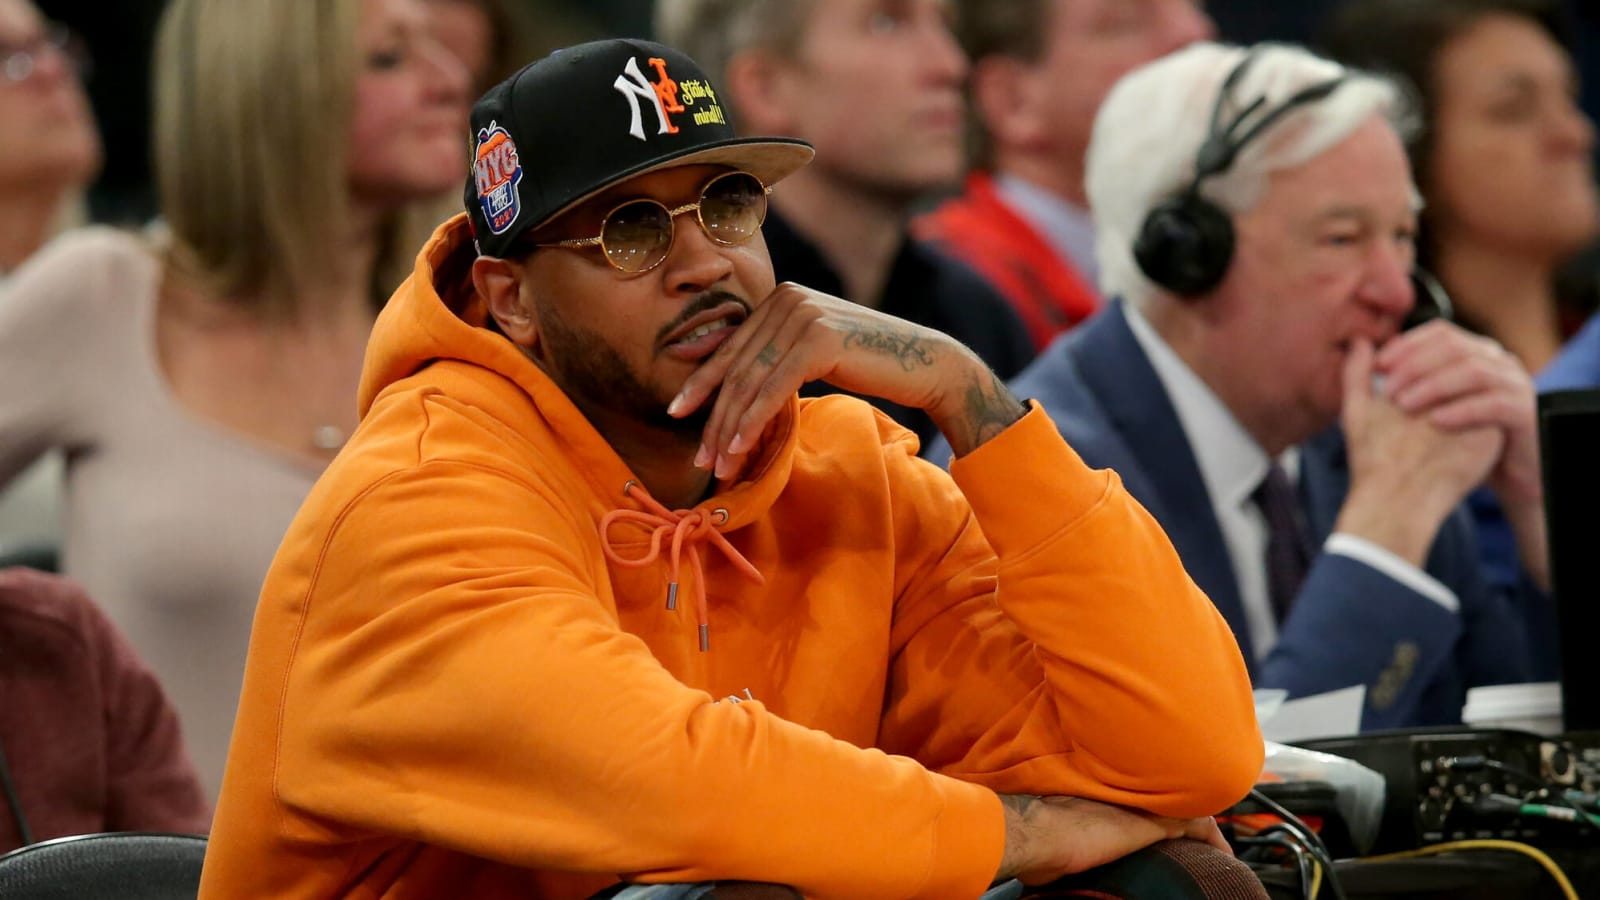 Carmelo Anthony and George Karl: Know everything about NBA superstar and Ex- coach’s beef